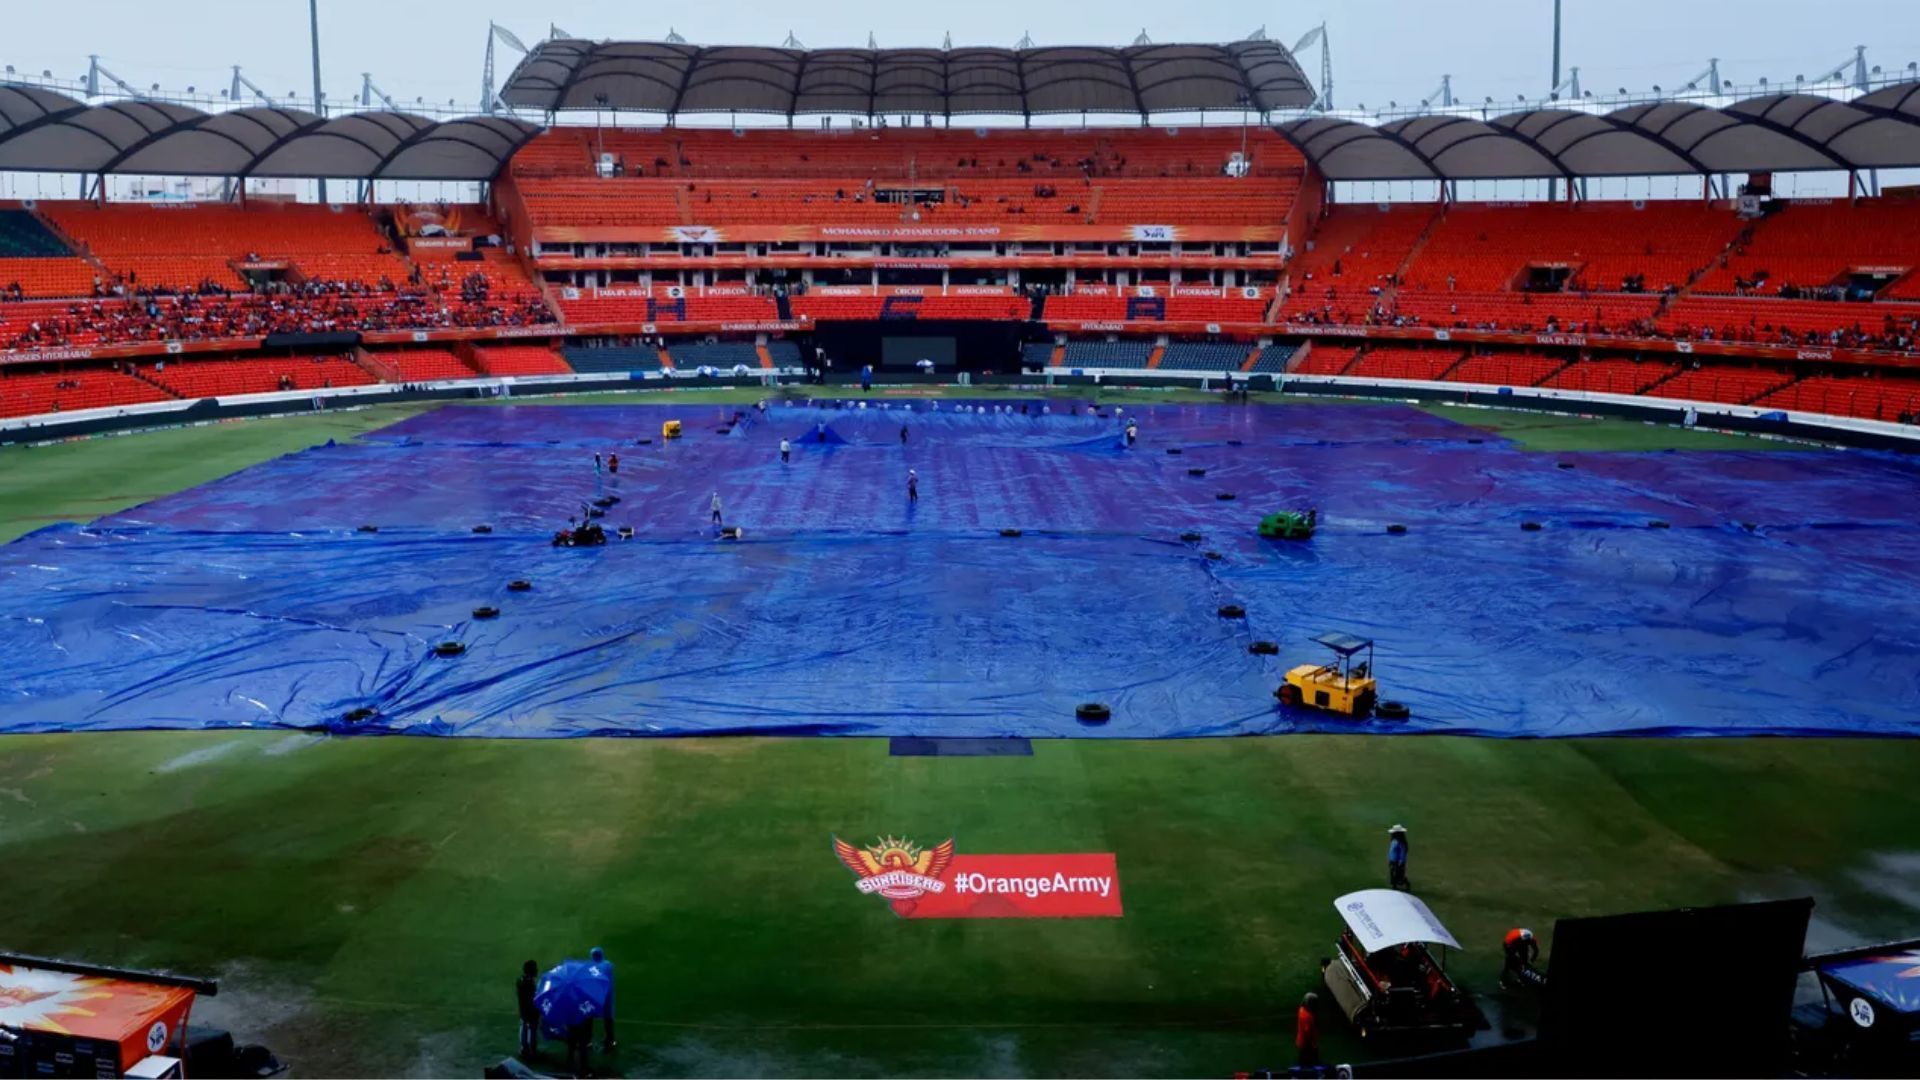 The SRH vs GT game on Thursday was abandoned due to rain